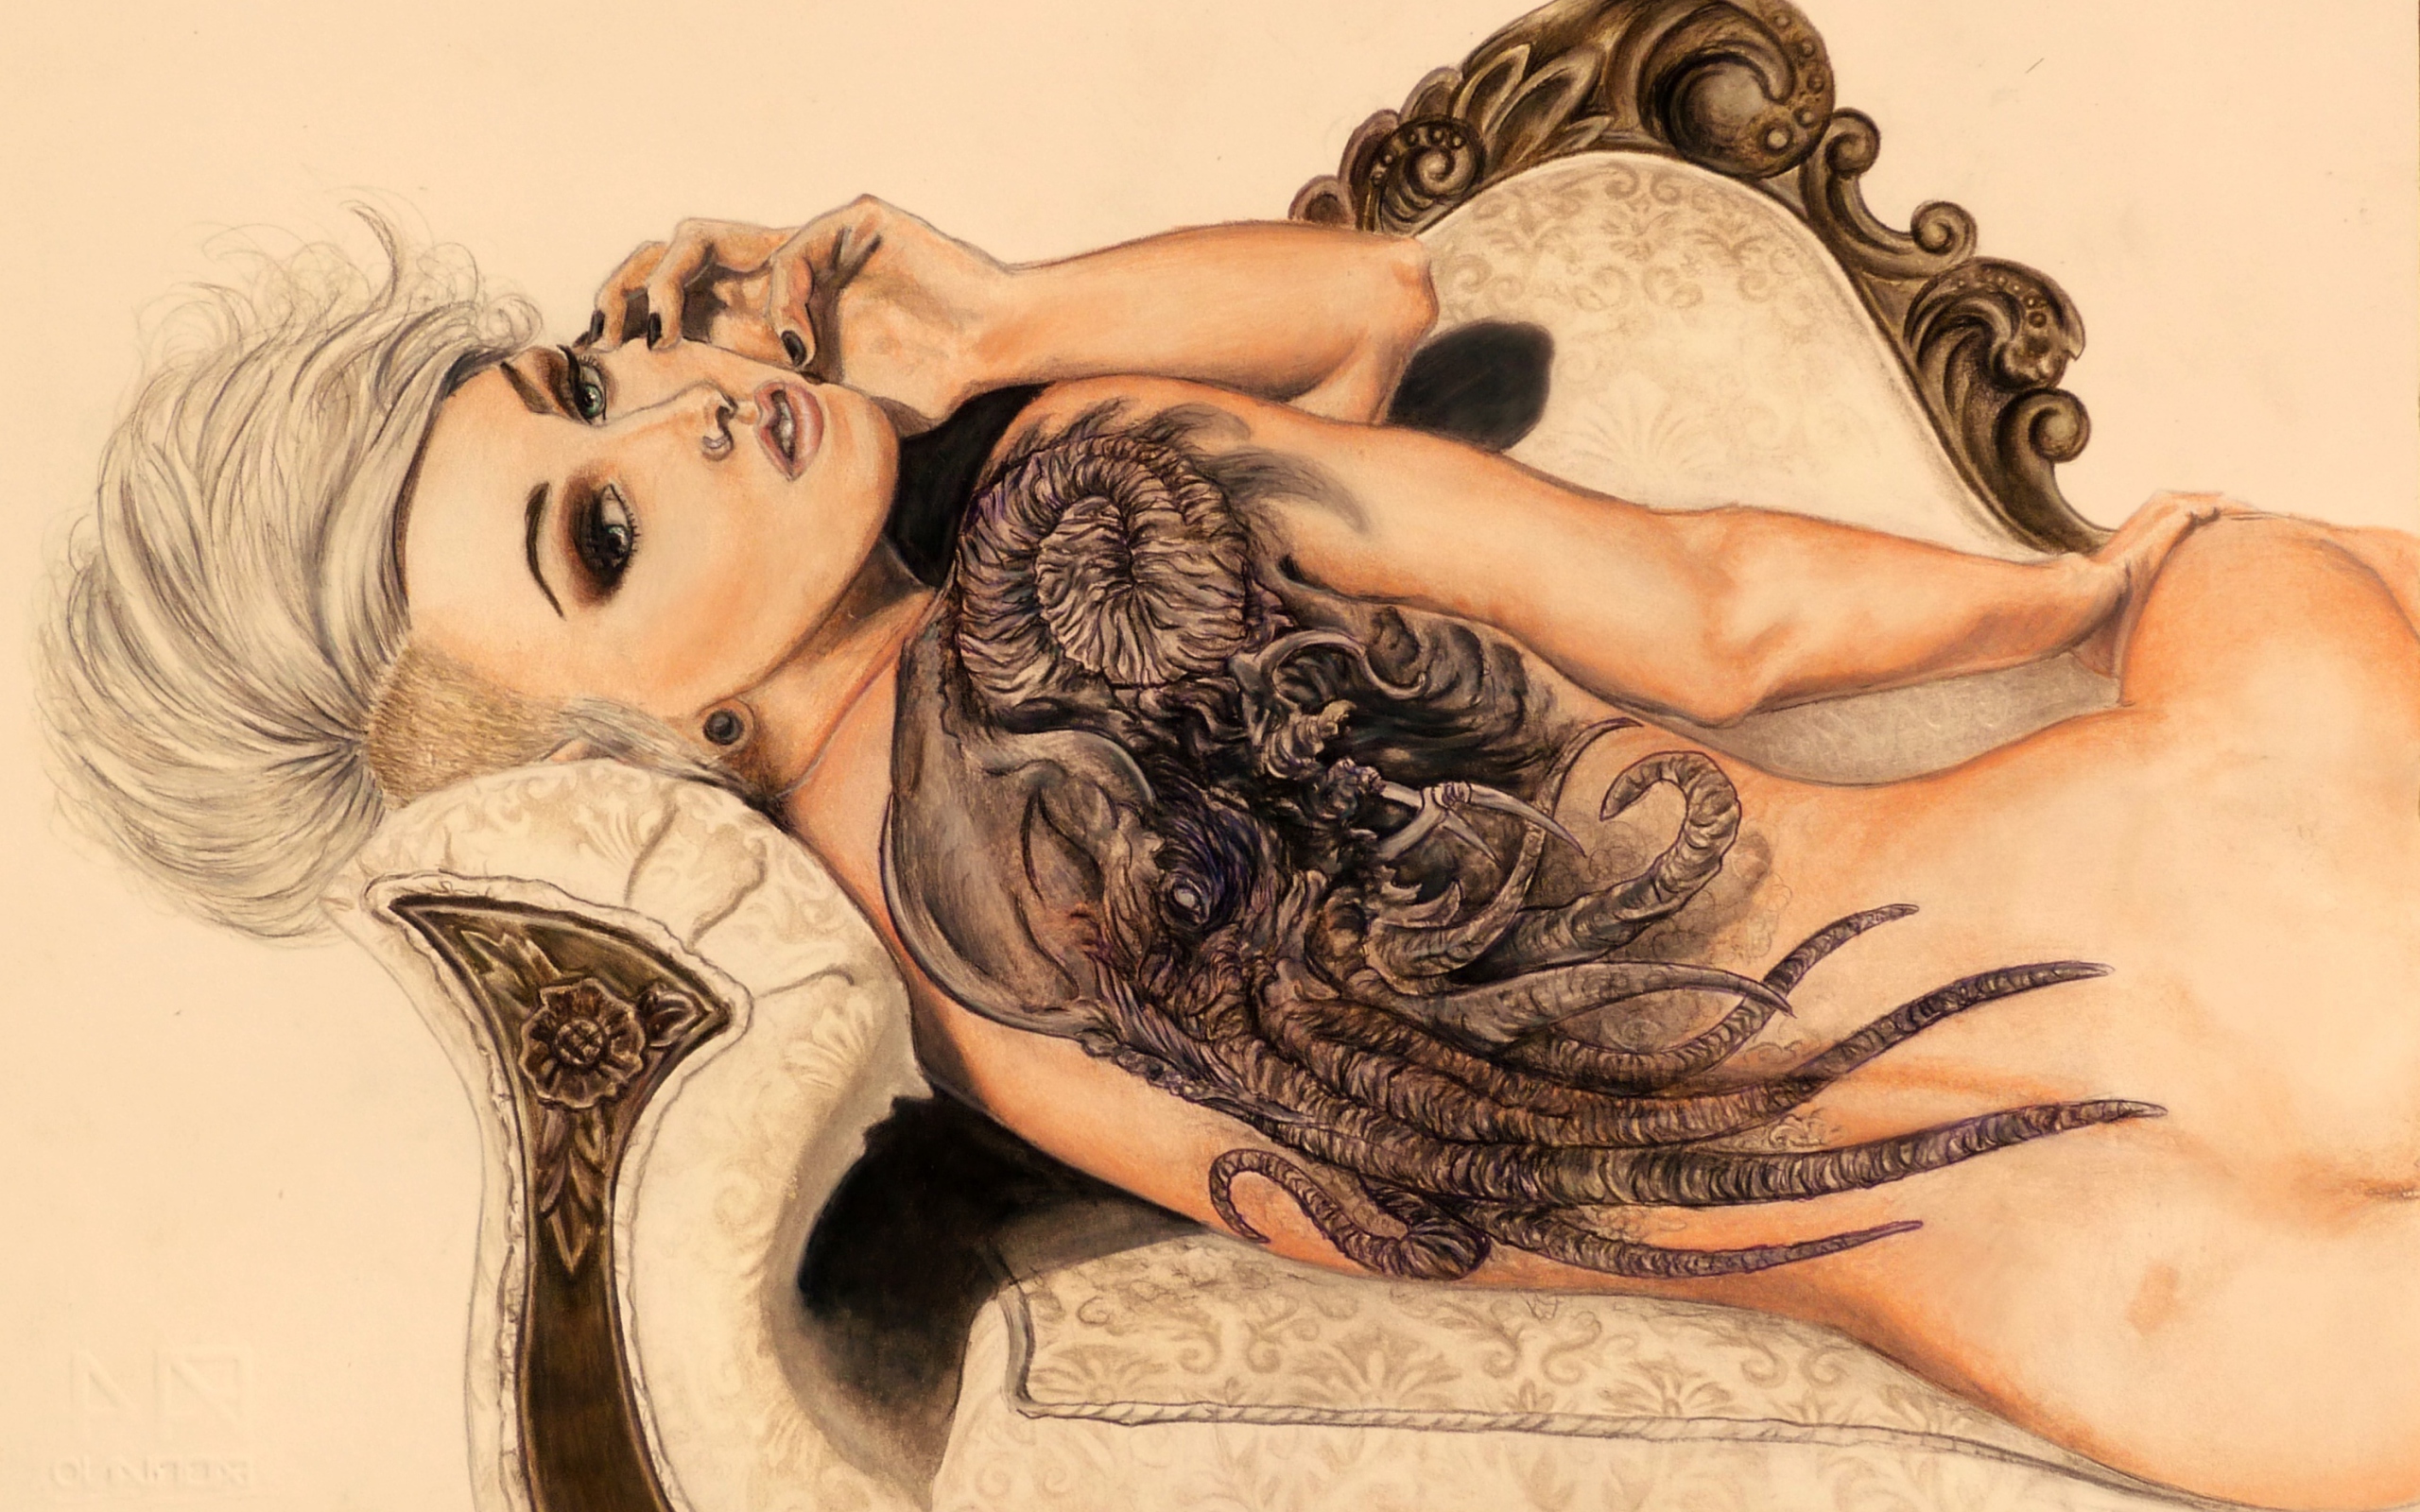 Das Drawing Of Girl With Tattoo Wallpaper 2560x1600